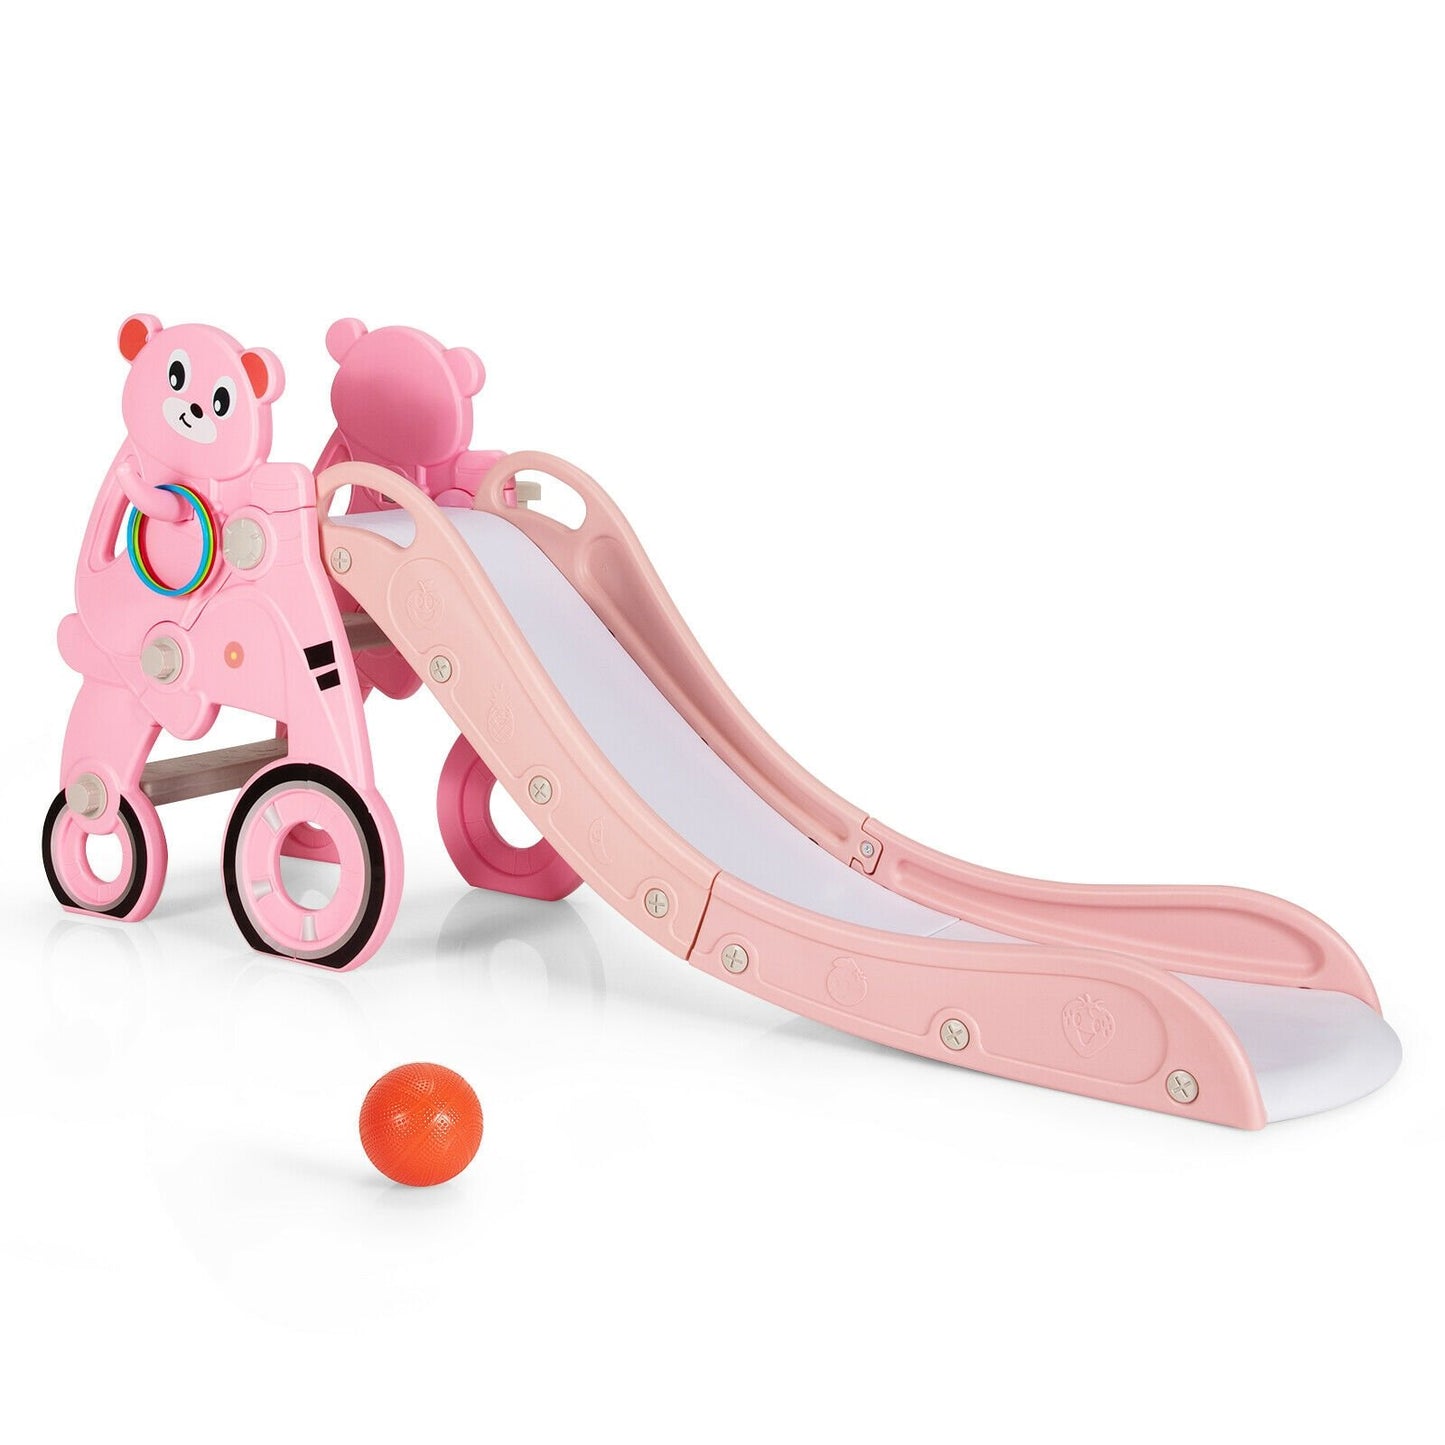 4-in-1 Kids Plastic Folding Slide PlaySet with Ring Toss and Ball, Pink at Gallery Canada